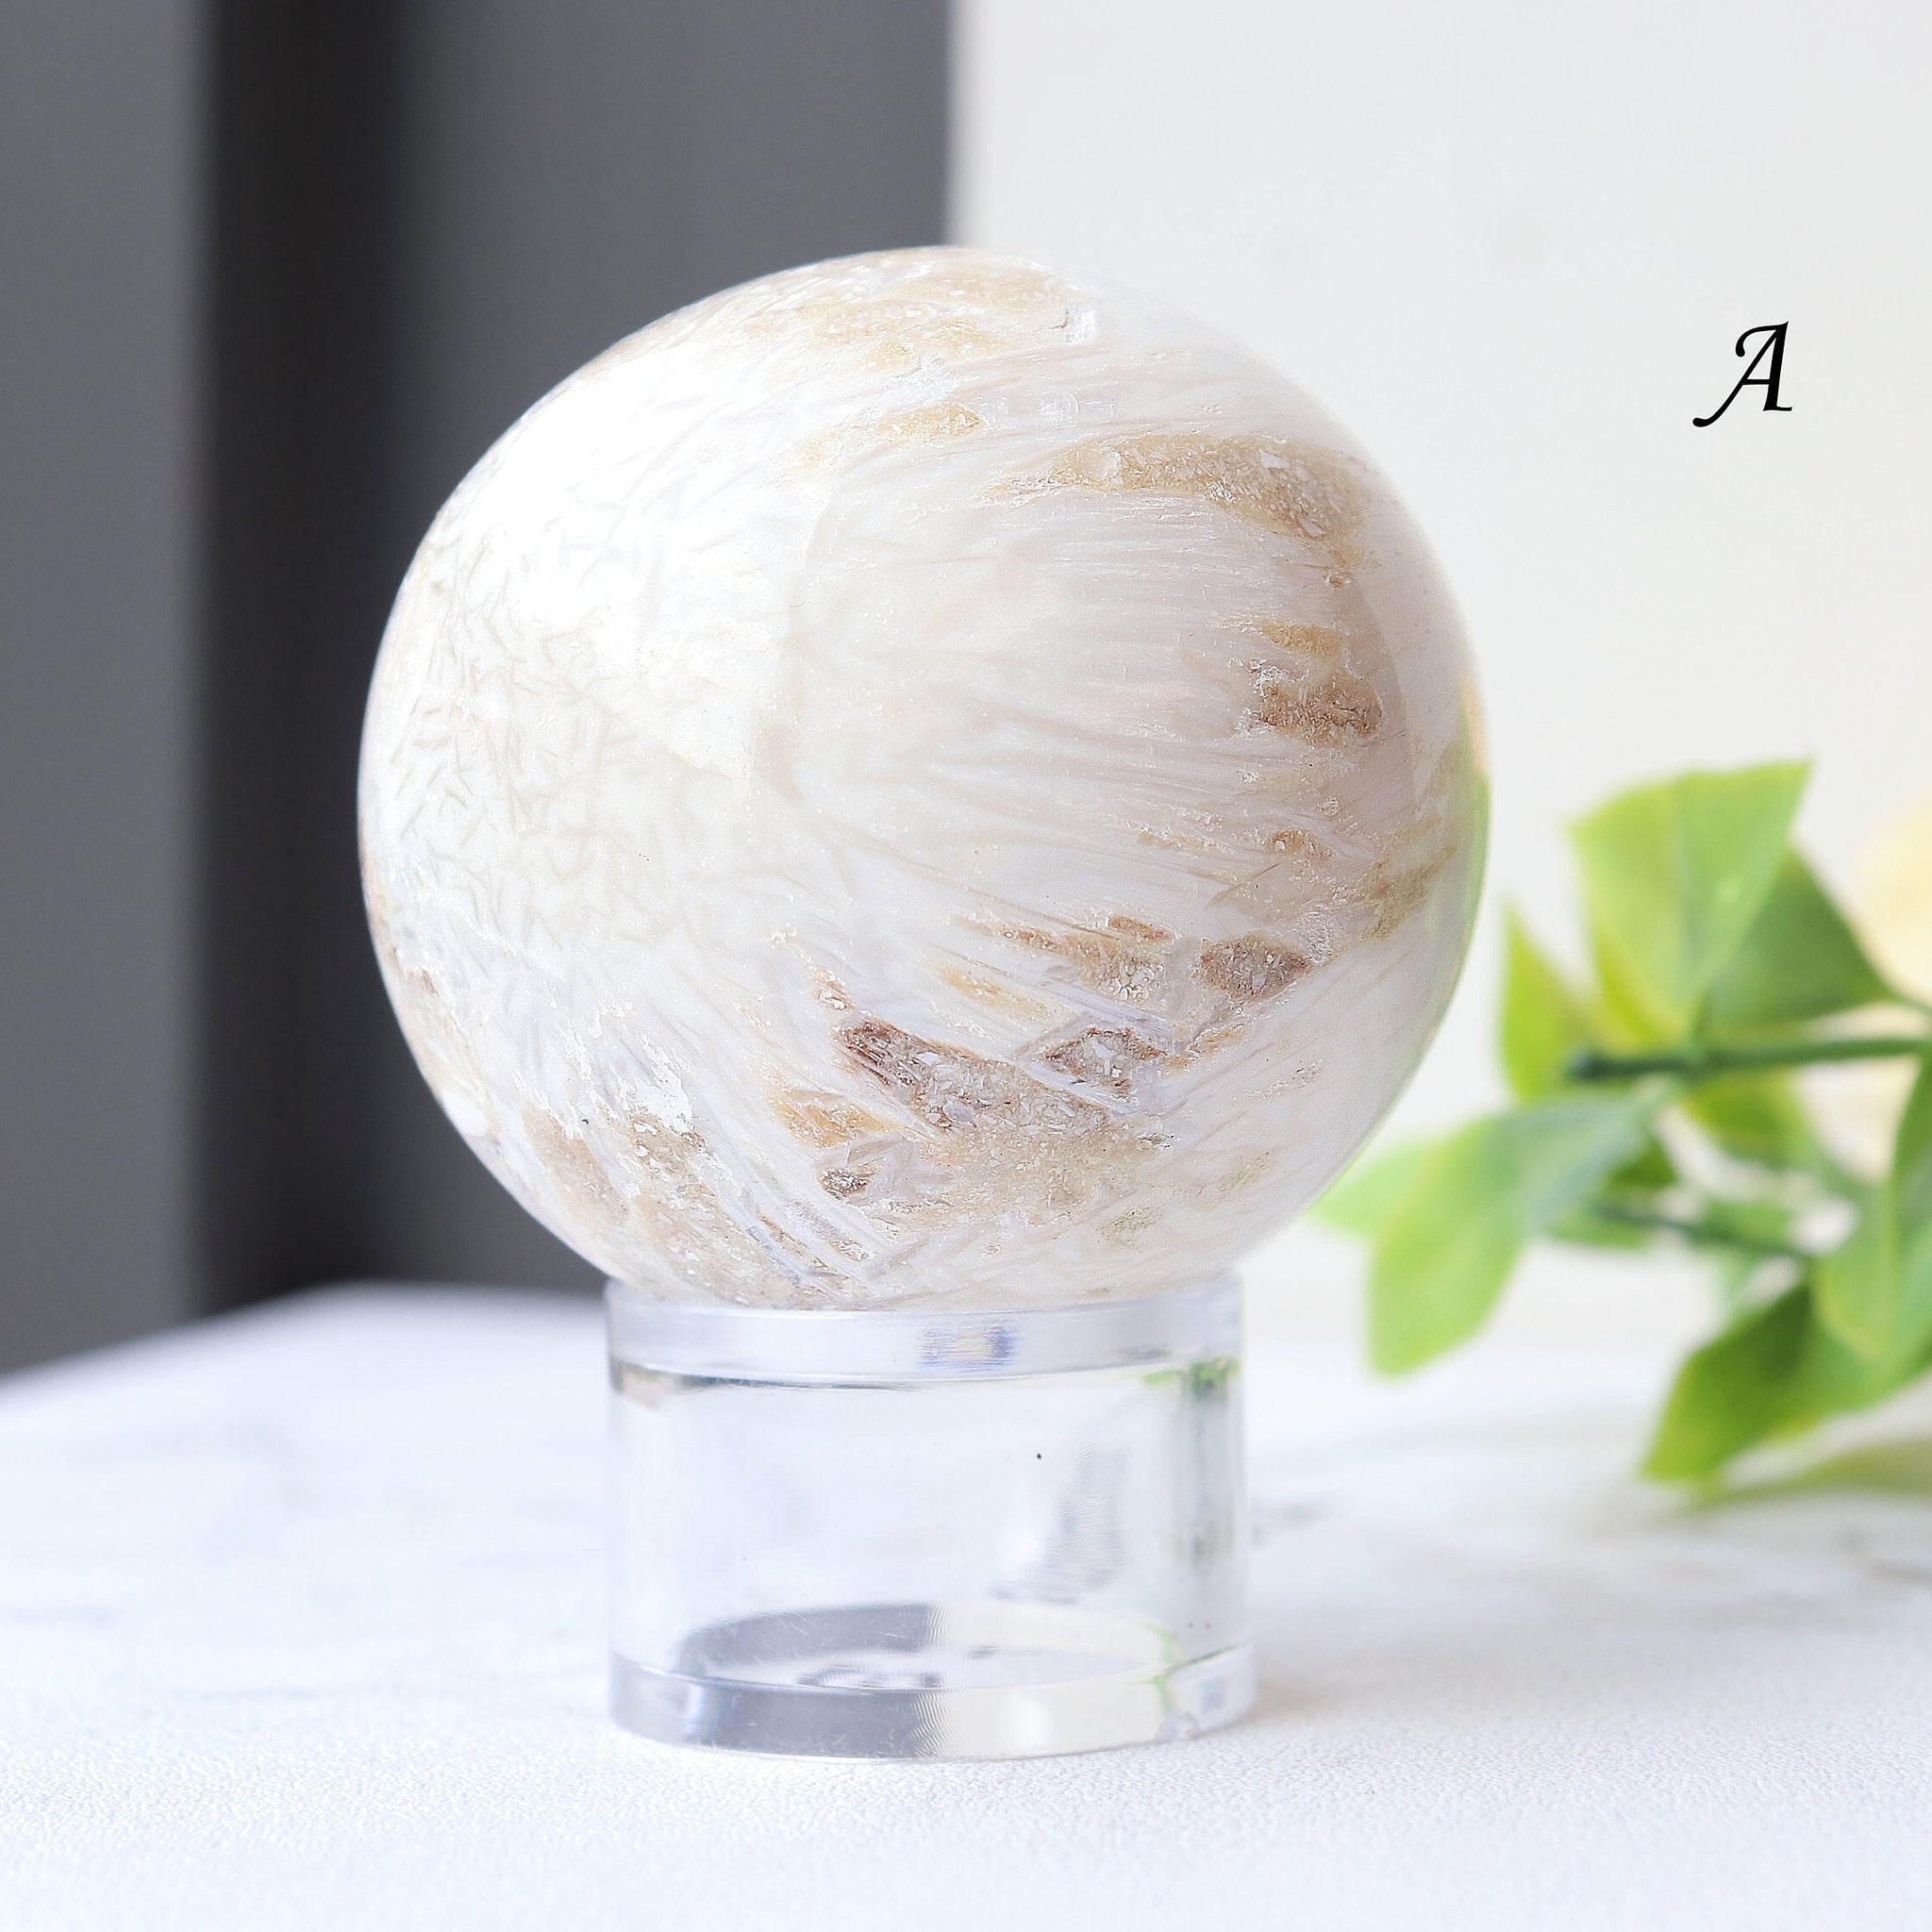 Scolecite Polished Spheres, Ethically Sourced, Meditation and Dream Stone, Tranquility and Peace